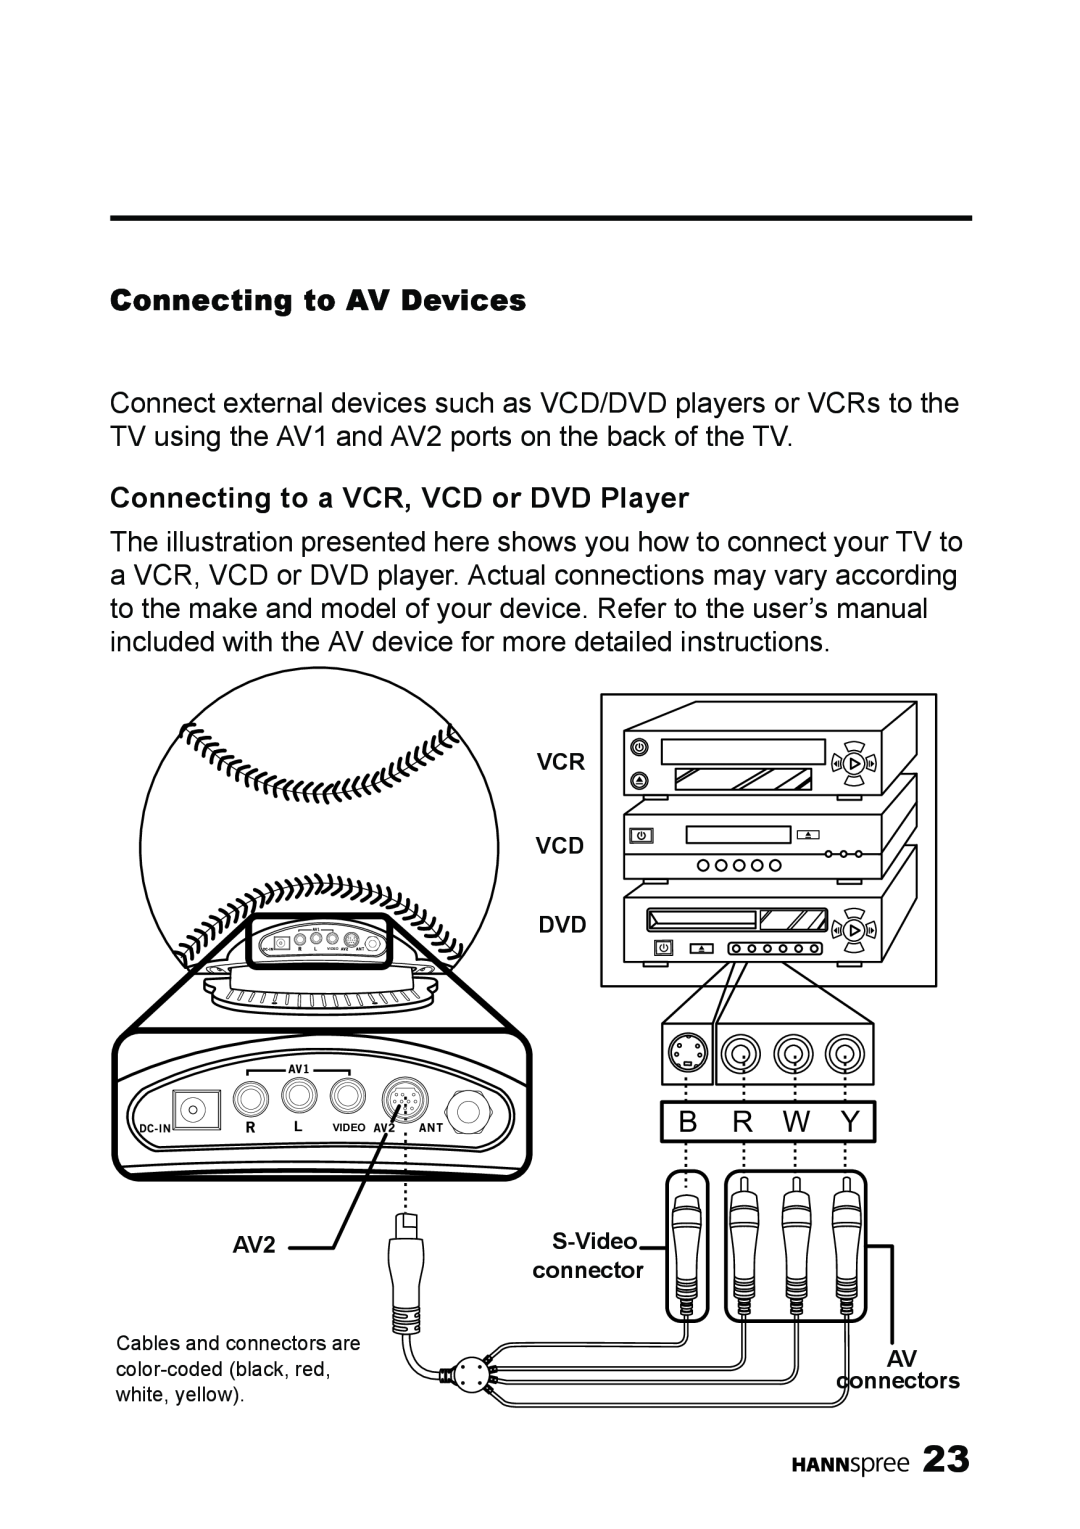 HANNspree ST09-10A1 user manual Connecting to AV Devices, Connecting to a VCR, VCD or DVD Player 